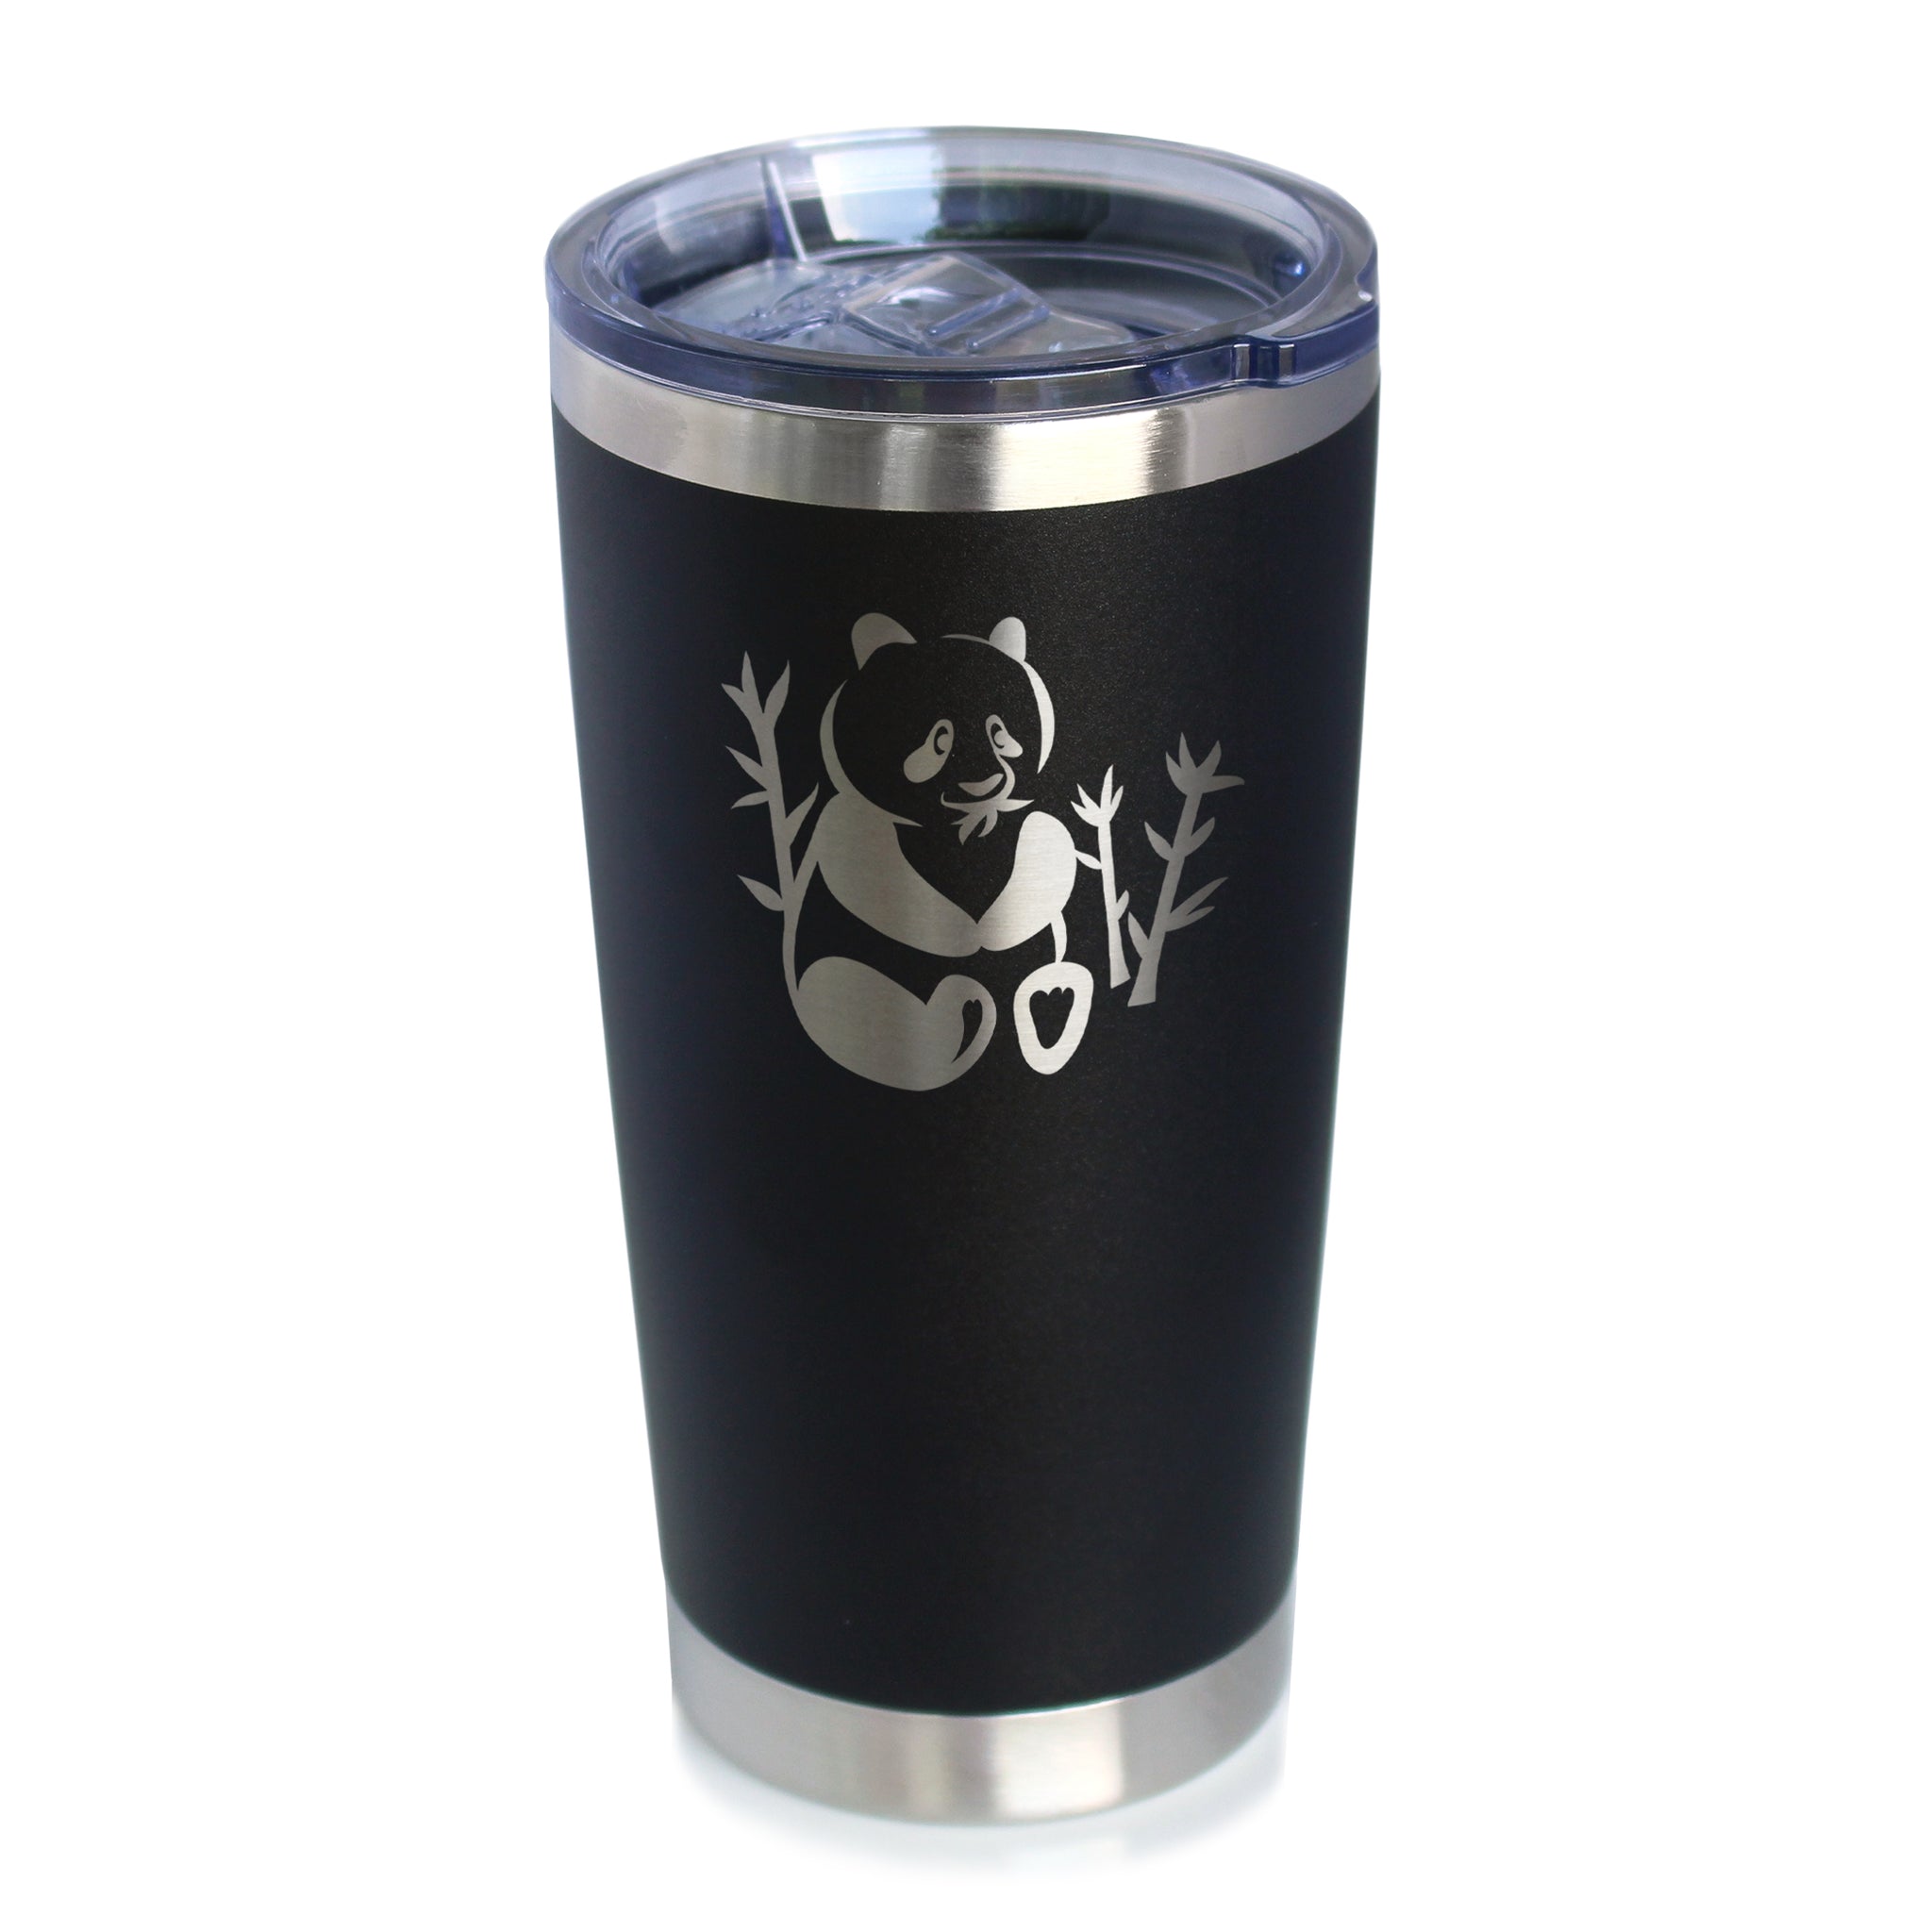 Panda - Insulated Coffee Tumbler Cup with Sliding Lid - Stainless